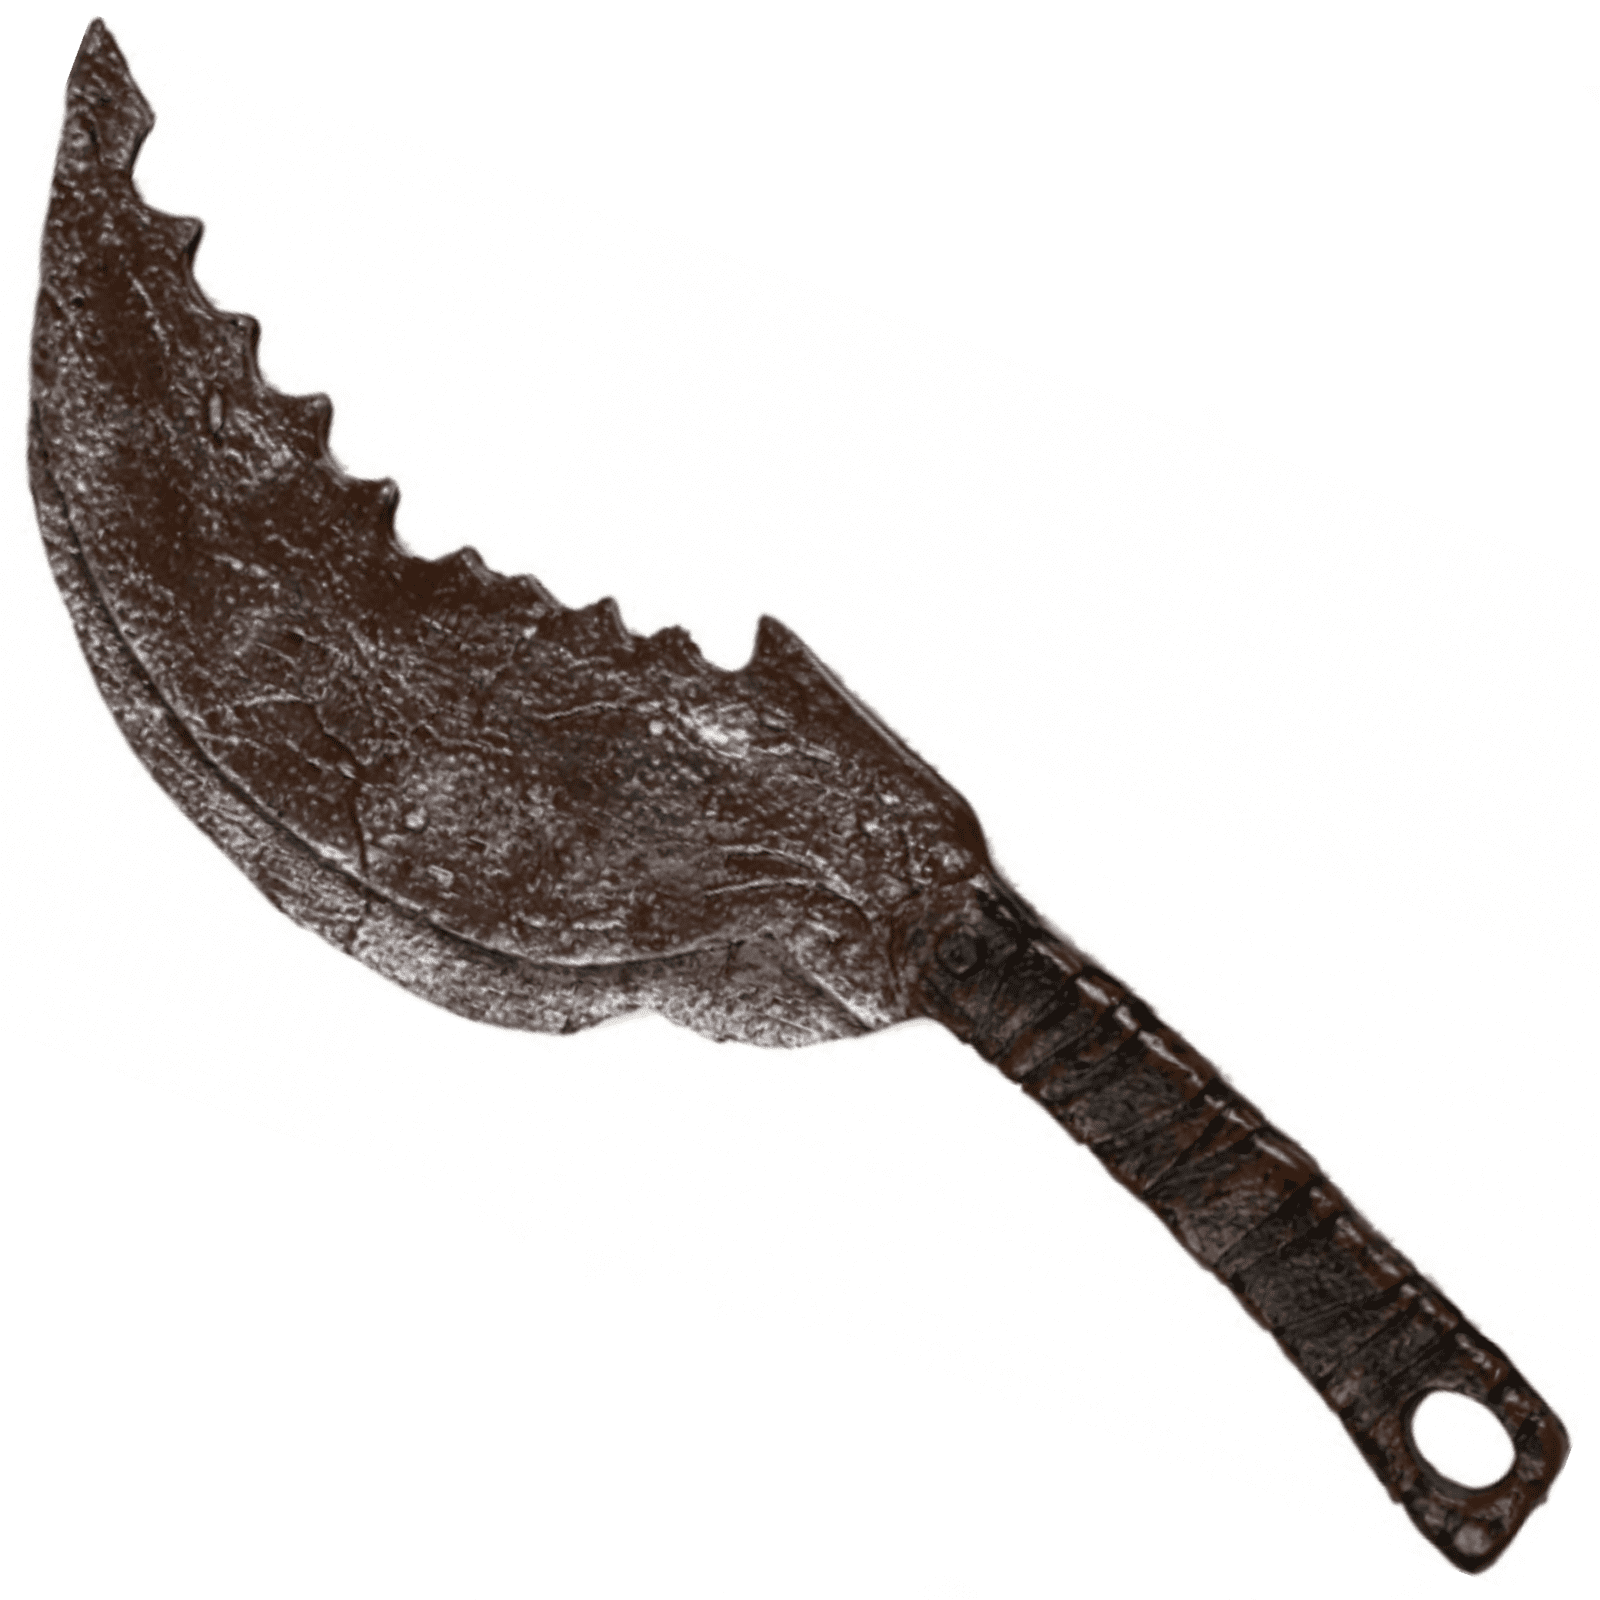 Featured image for “Zombie Killer Knife (Sickle)”